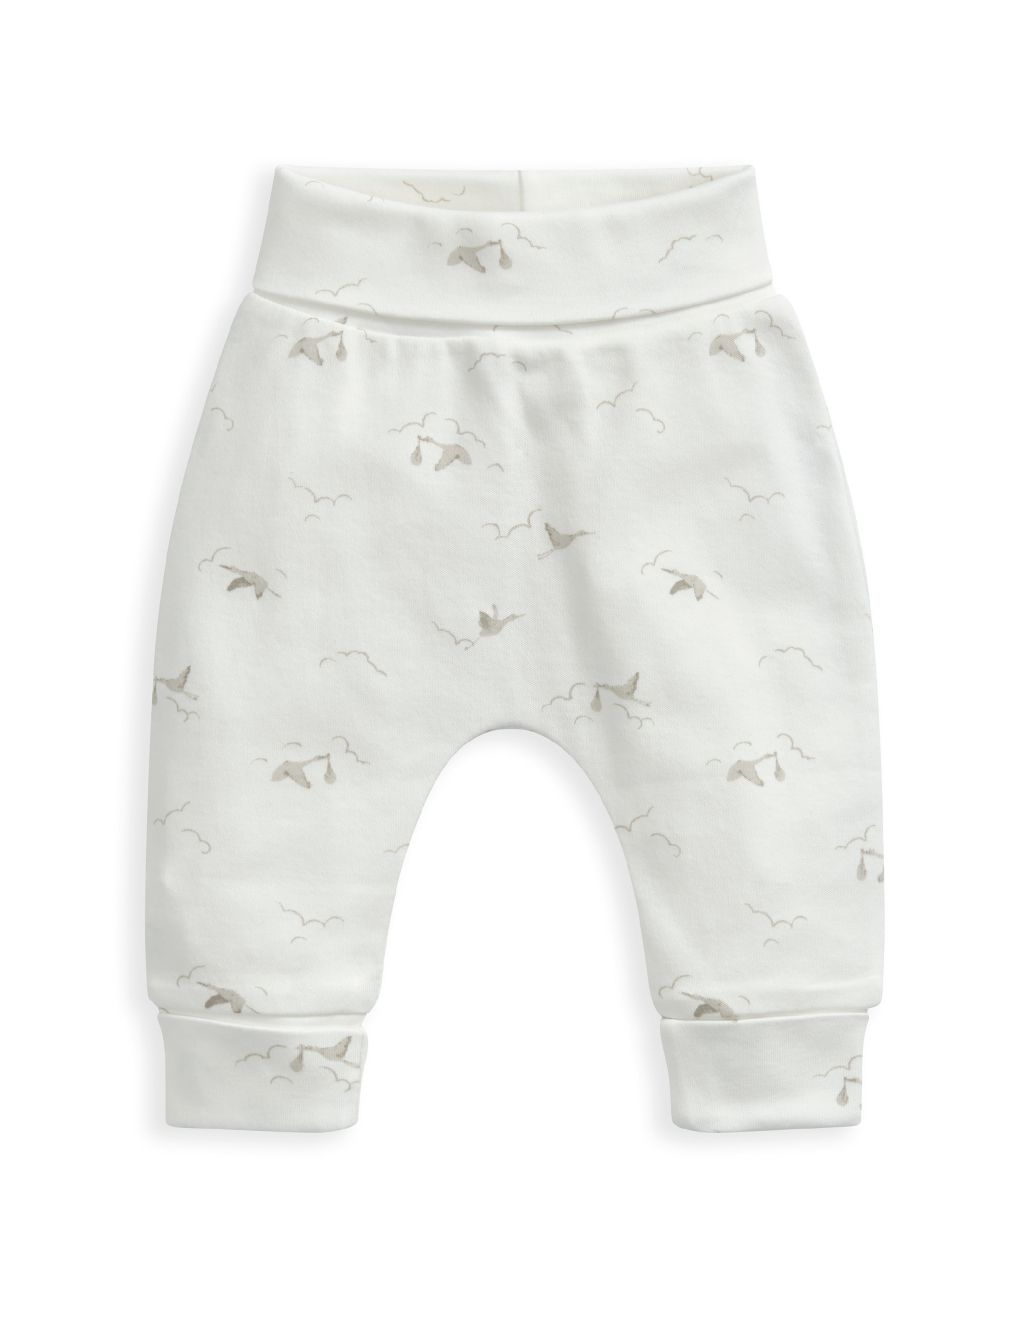 Stork My First Outfit 3 Piece Set (7lbs-6 Mths) | Mamas & Papas | M&S